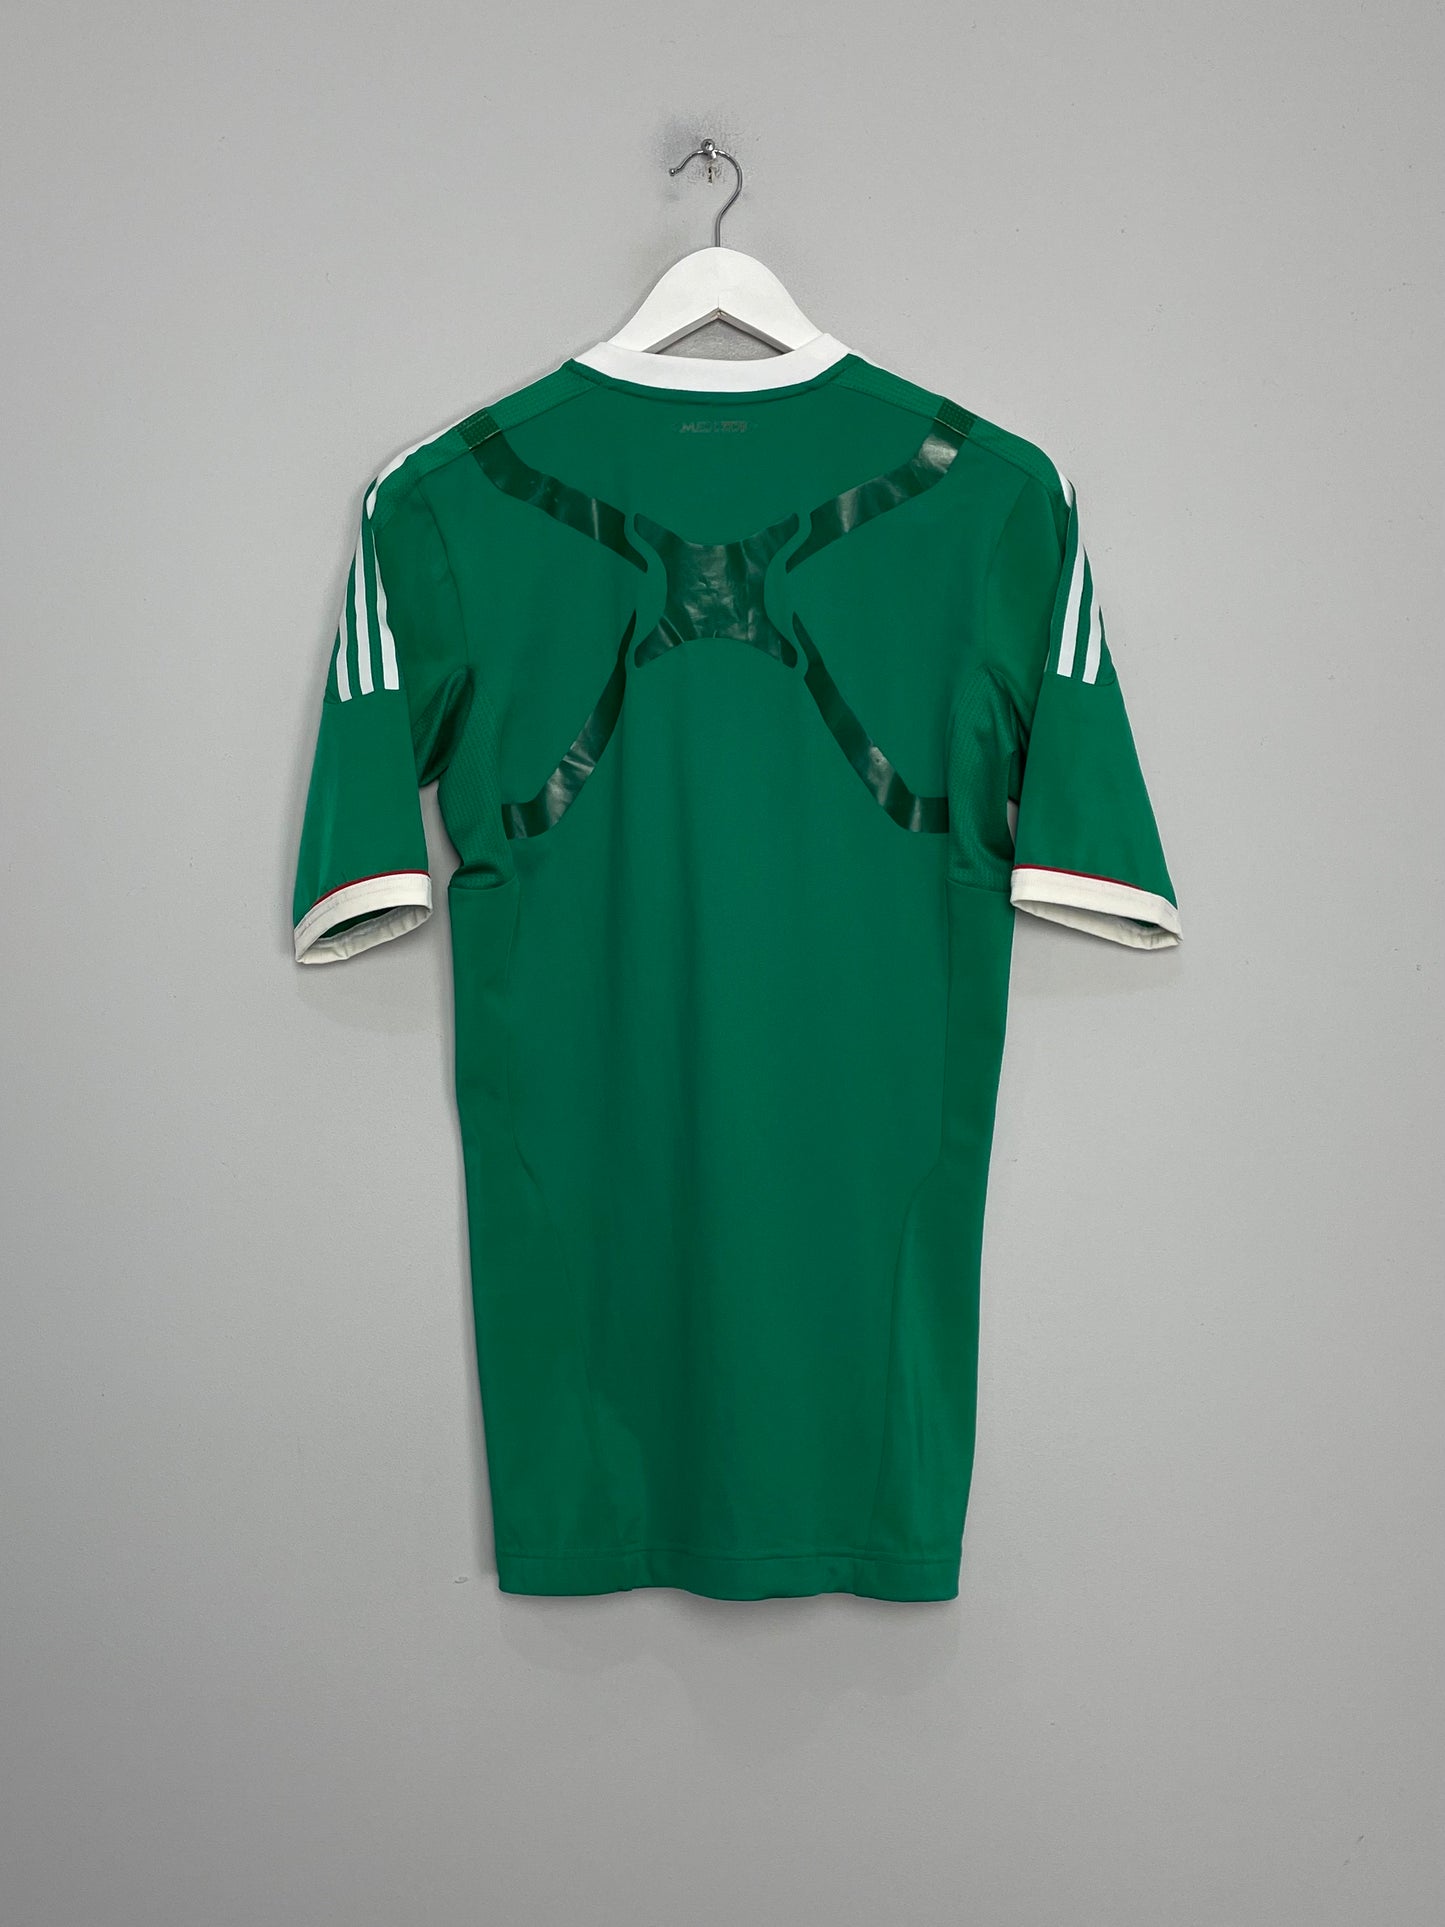 2011/13 MEXICO *PLAYER ISSUE* HOME SHIRT (L) ADIDAS